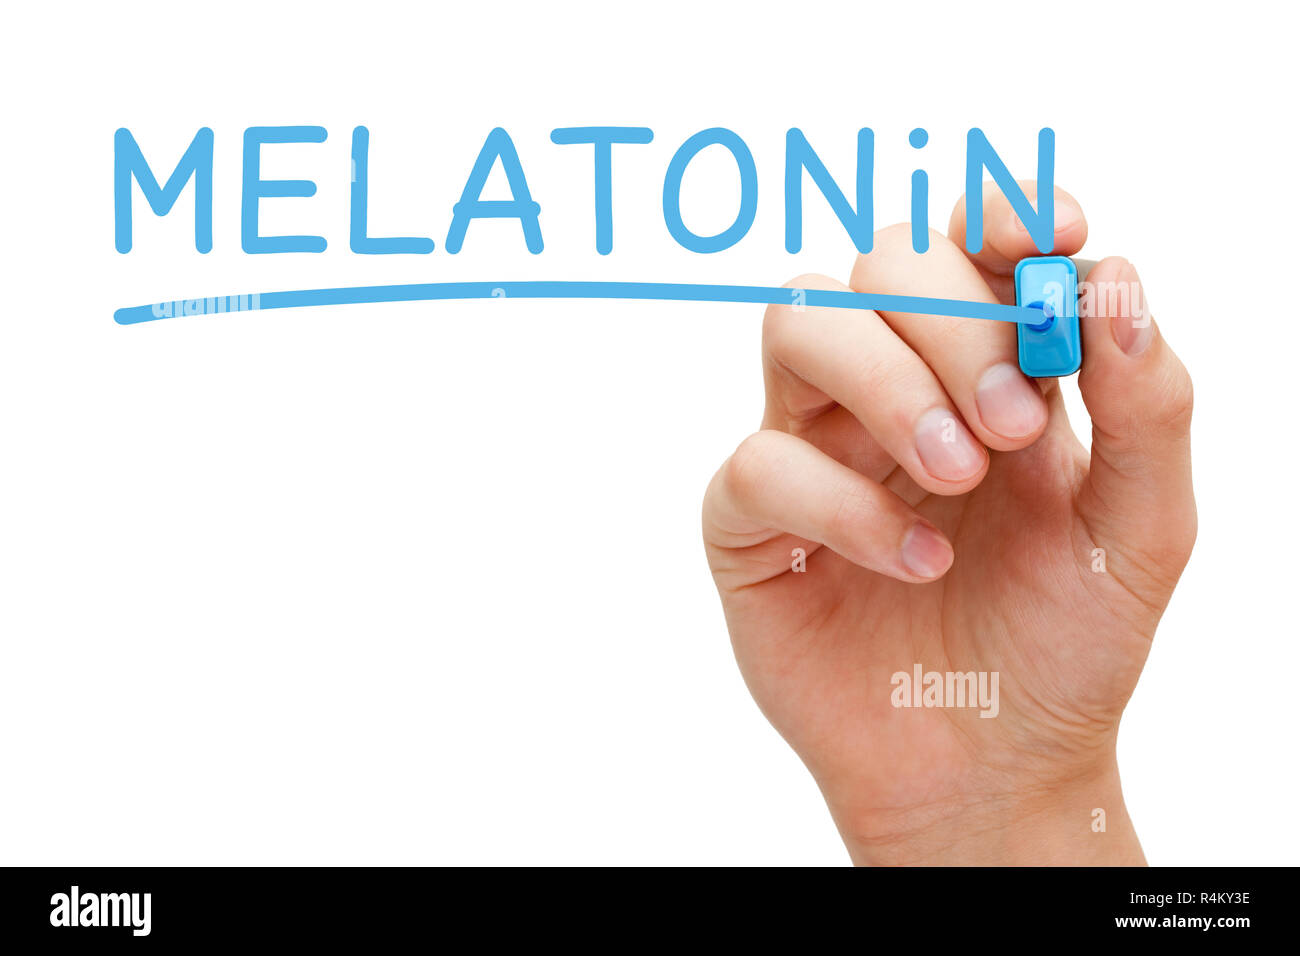 Hand writing Melatonin - the sleep hormone with blue marker on transparent glass board isolated on white. Stock Photo